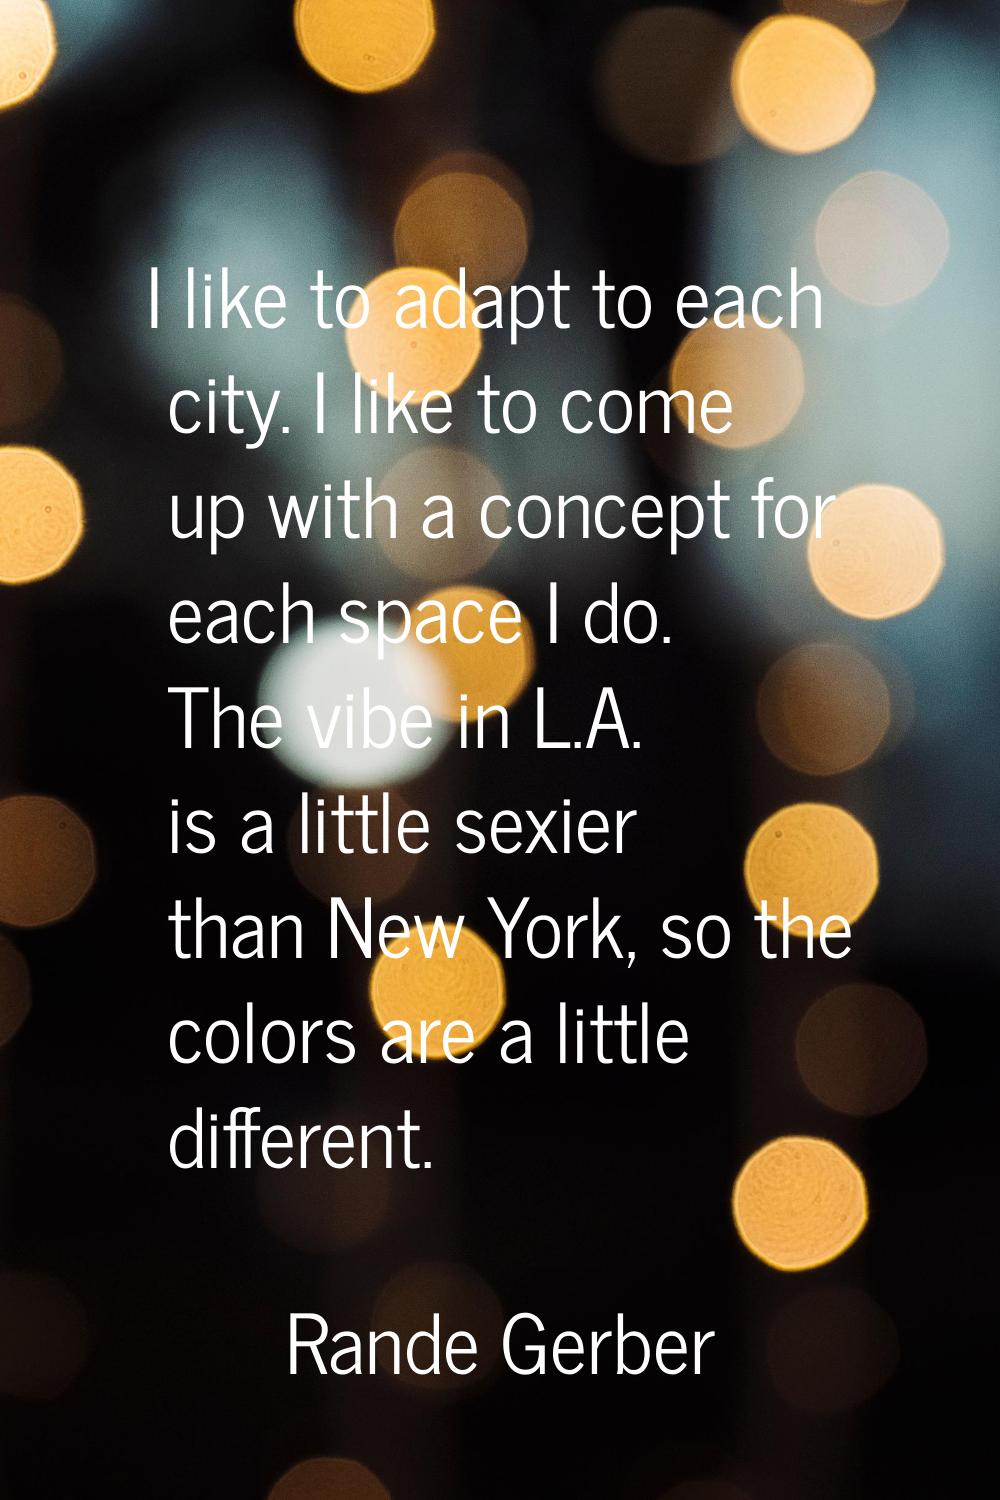 I like to adapt to each city. I like to come up with a concept for each space I do. The vibe in L.A